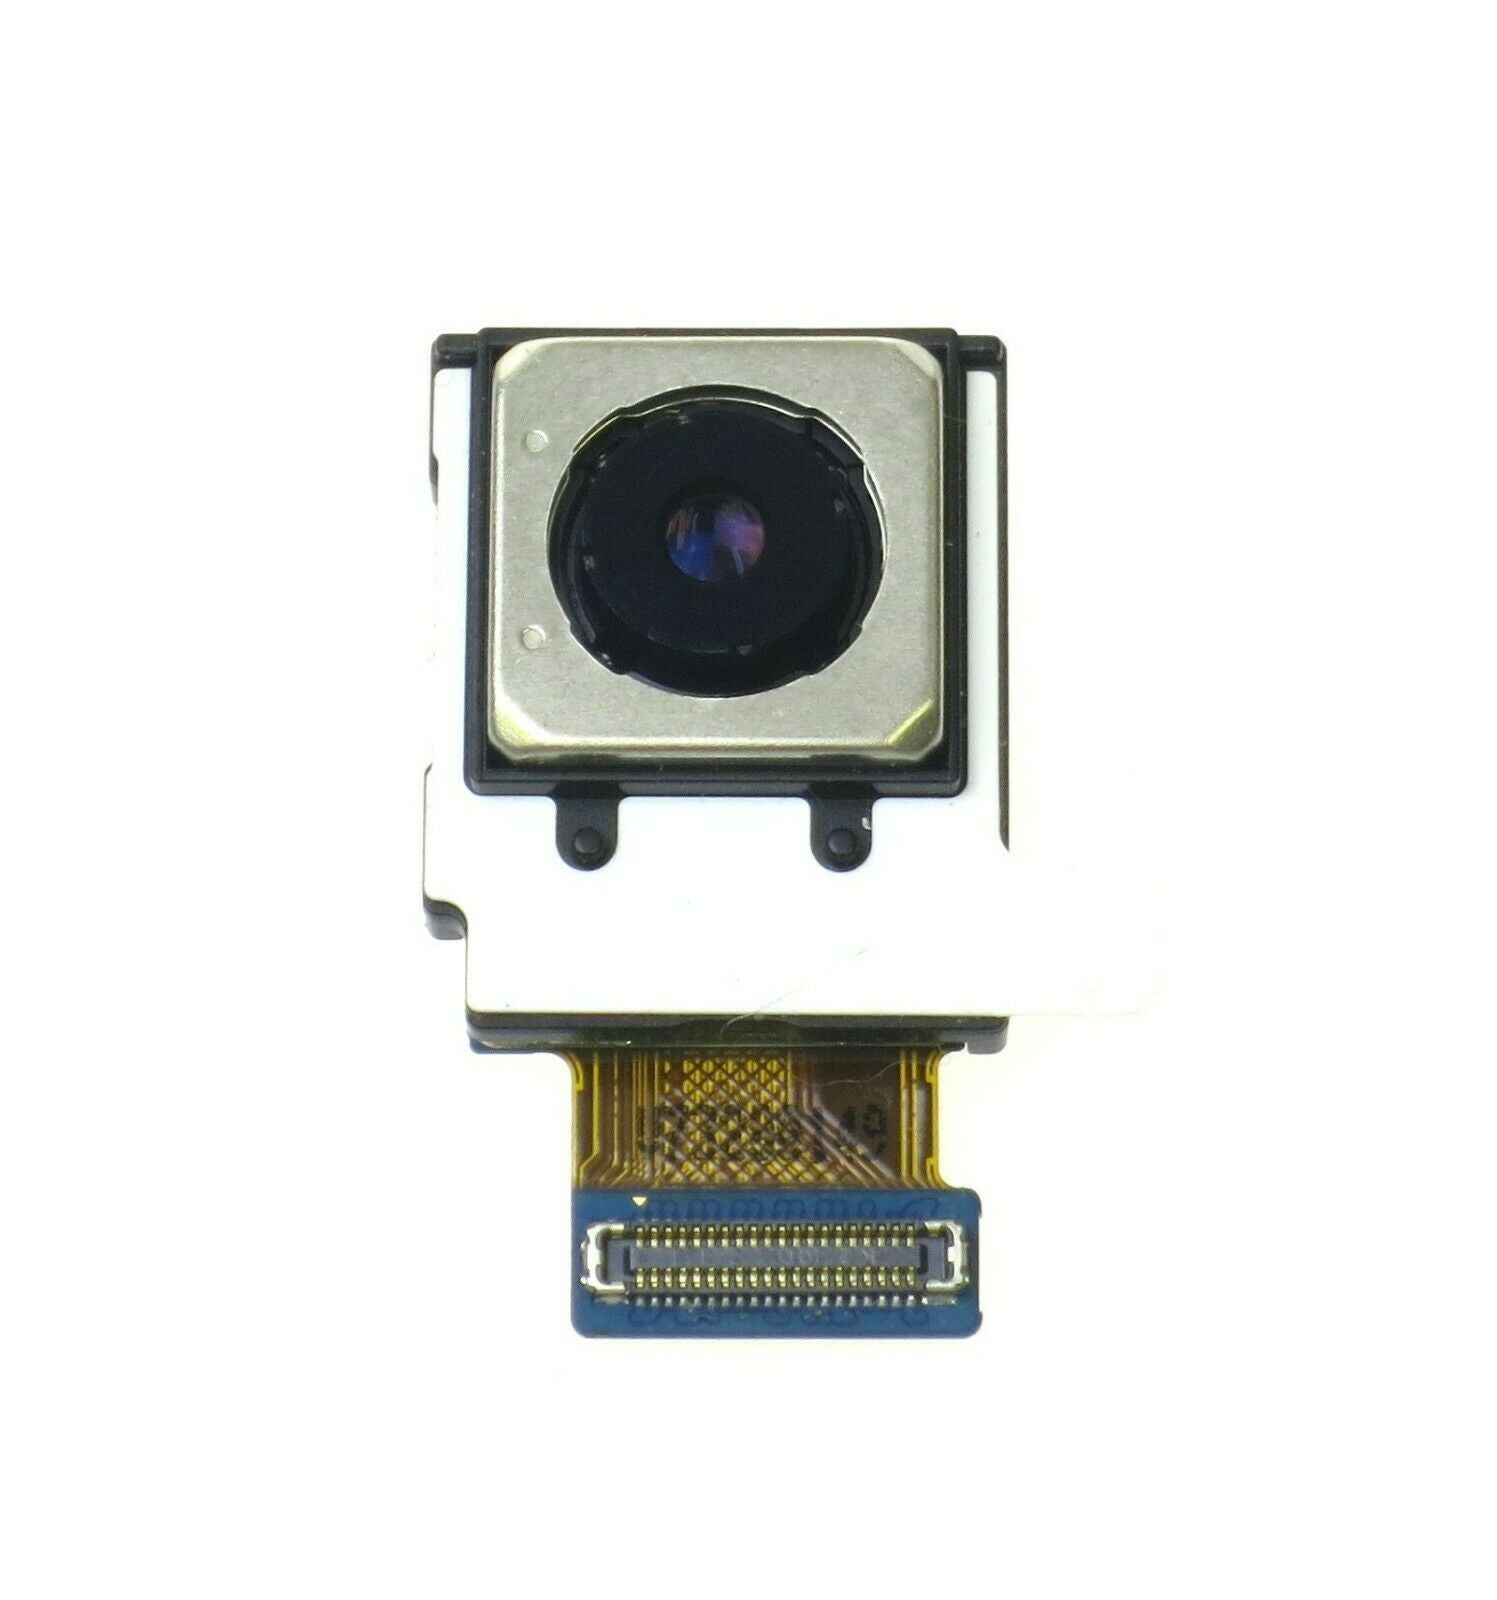 Samsung Galaxy S8 G950 - Genuine Rear Main Camera Module for [product_price] - First Help Tech